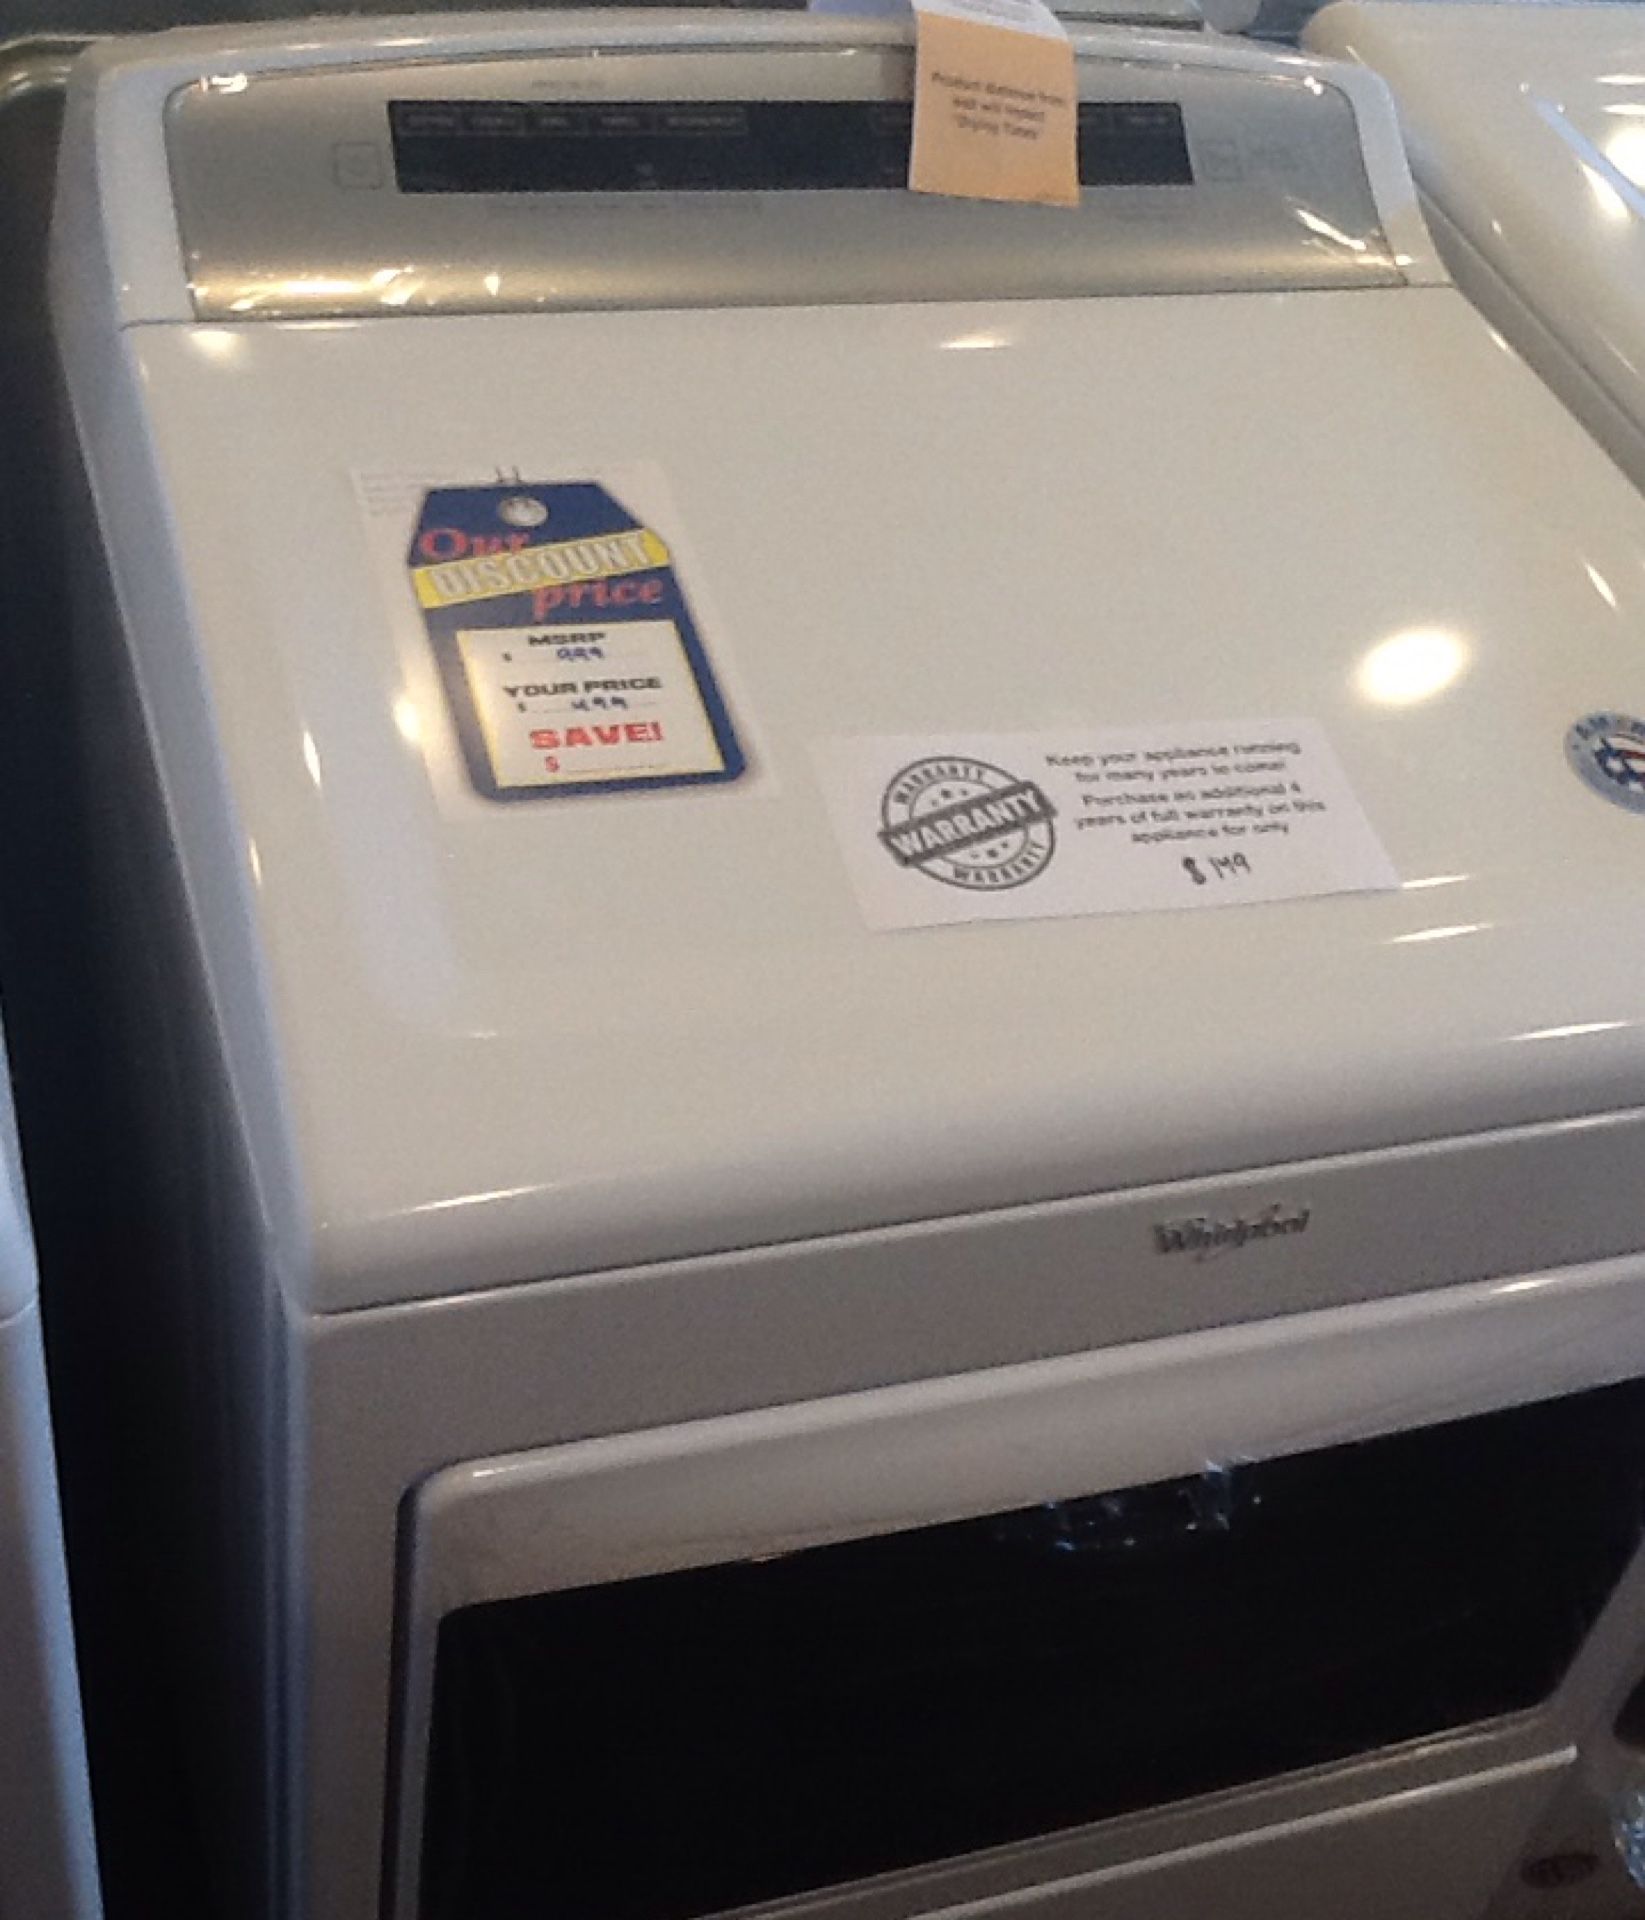 New open box whirlpool electric dryer WED7500GW